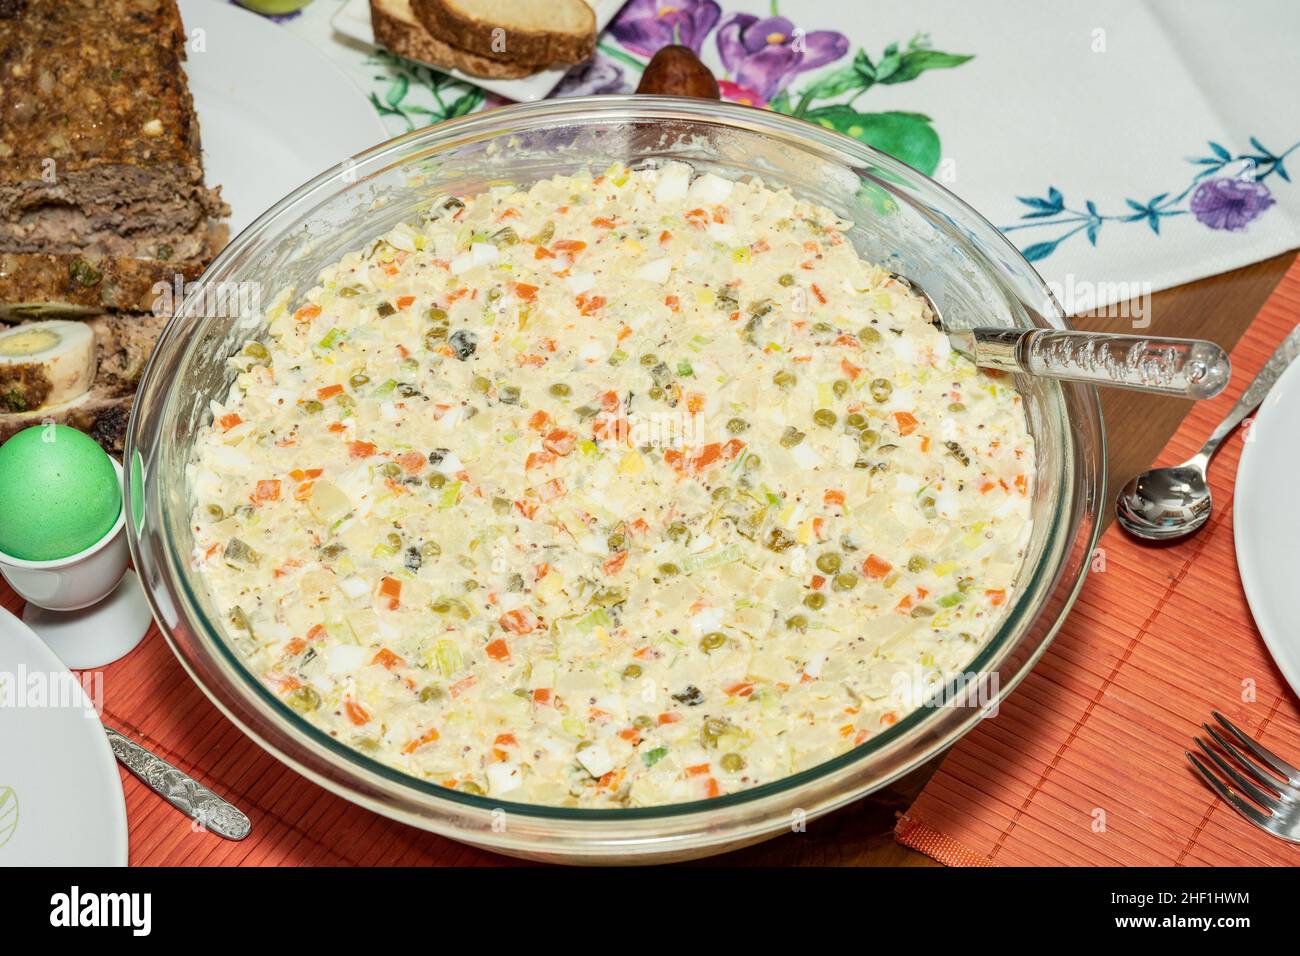 Salade Olivier is a salad composed of diced potato, vegetables and sometimes meats bound in mayonnaise. Stock Photo